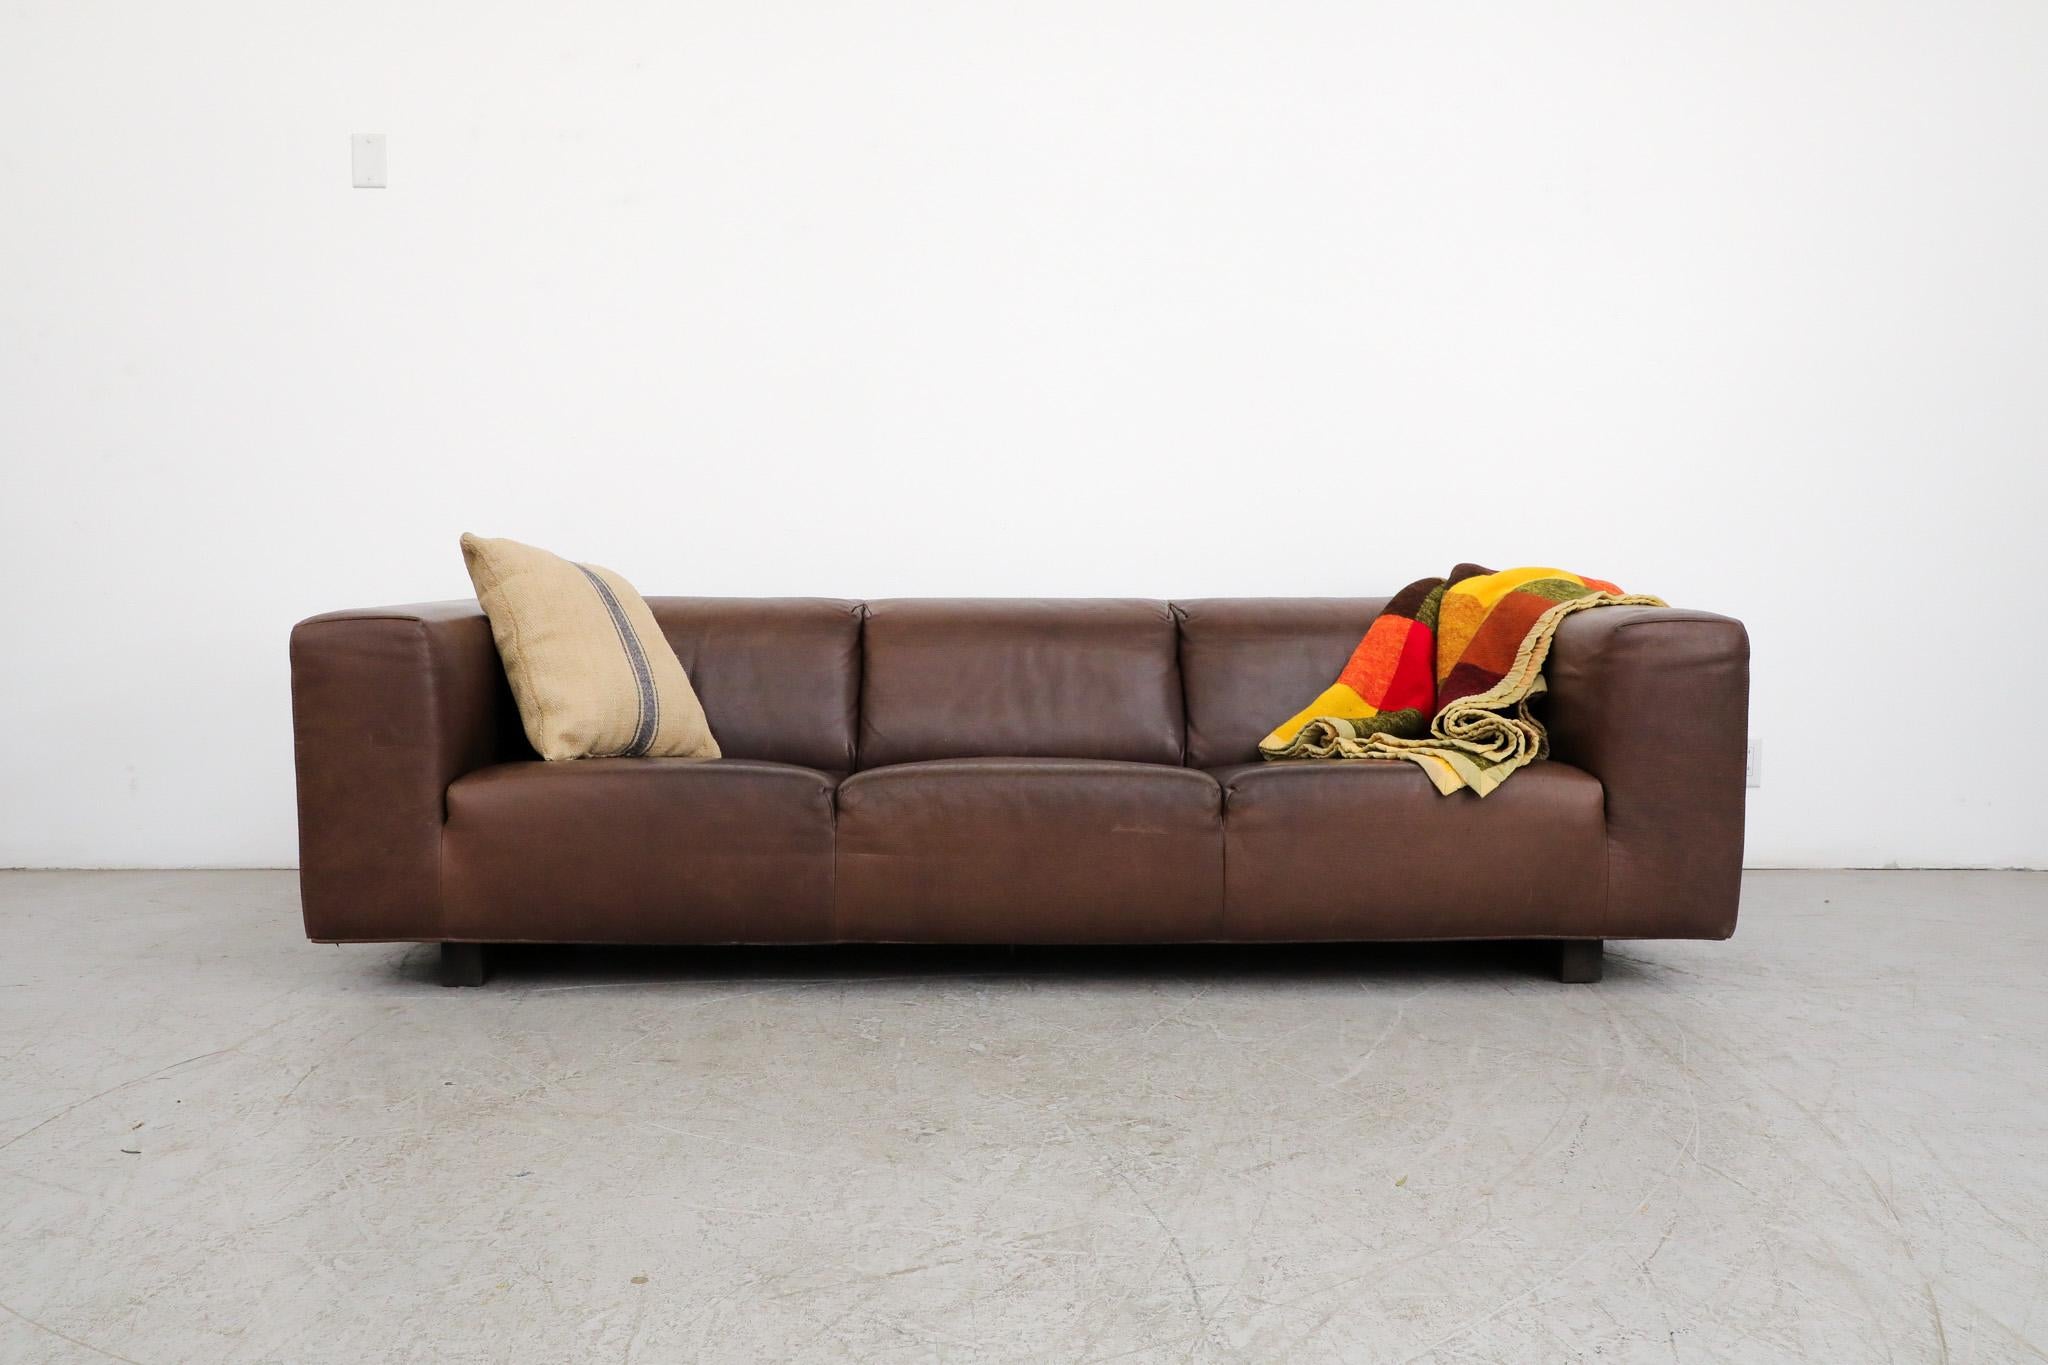 Large Mid-Century 'Bommel' sofa by Gerard van den Berg for LABEL, 1985. Attractive three-seater sofa with thick brown leather and wood feet. Ideal sofa for watching movies or sleeping. In original condition with some visible wear and lovely patina